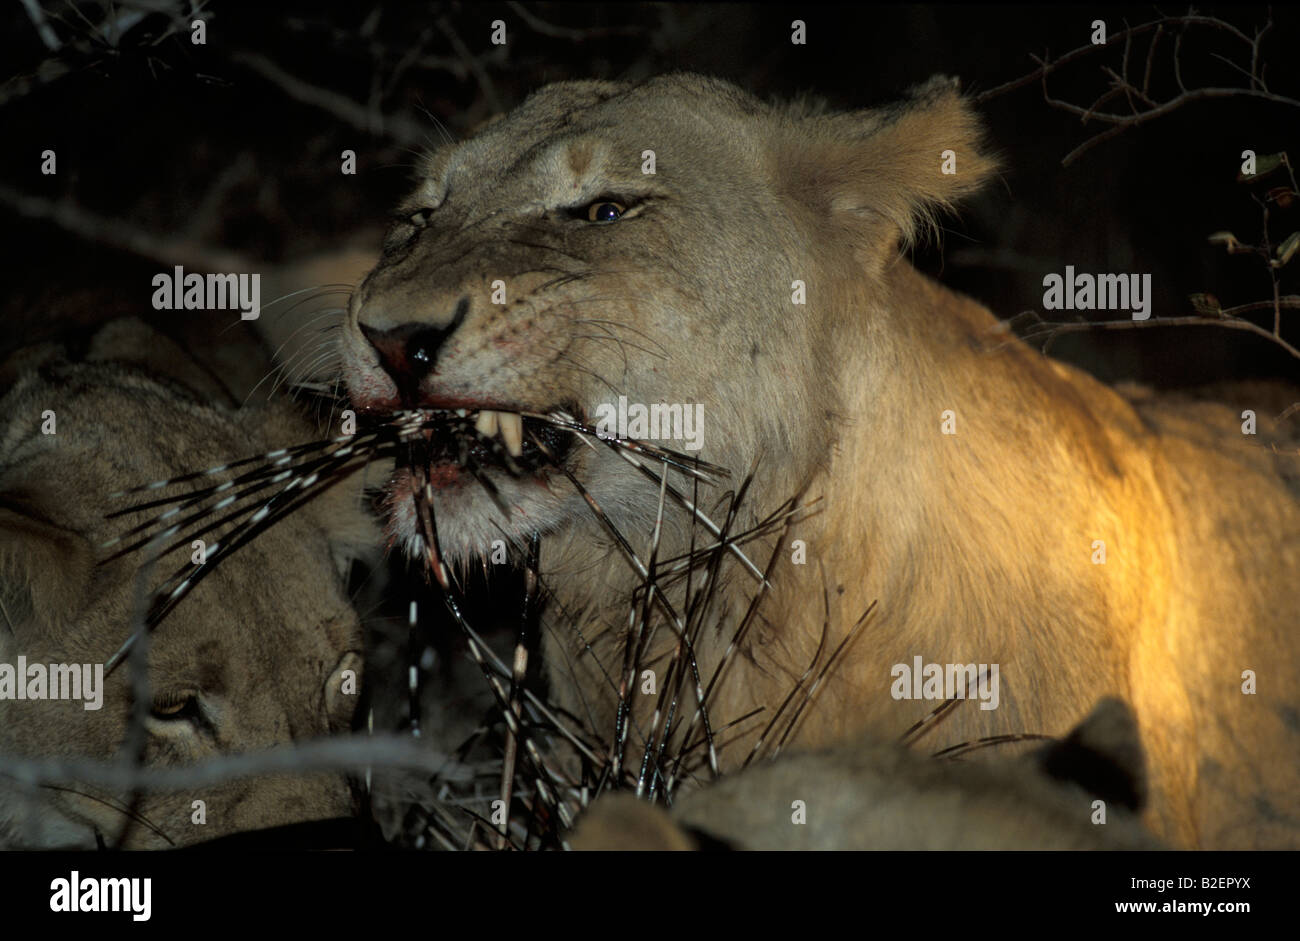 lion-pulling-out-quills-while-feeding-on-porcupine-kill-at-night-B2EPYX.jpg